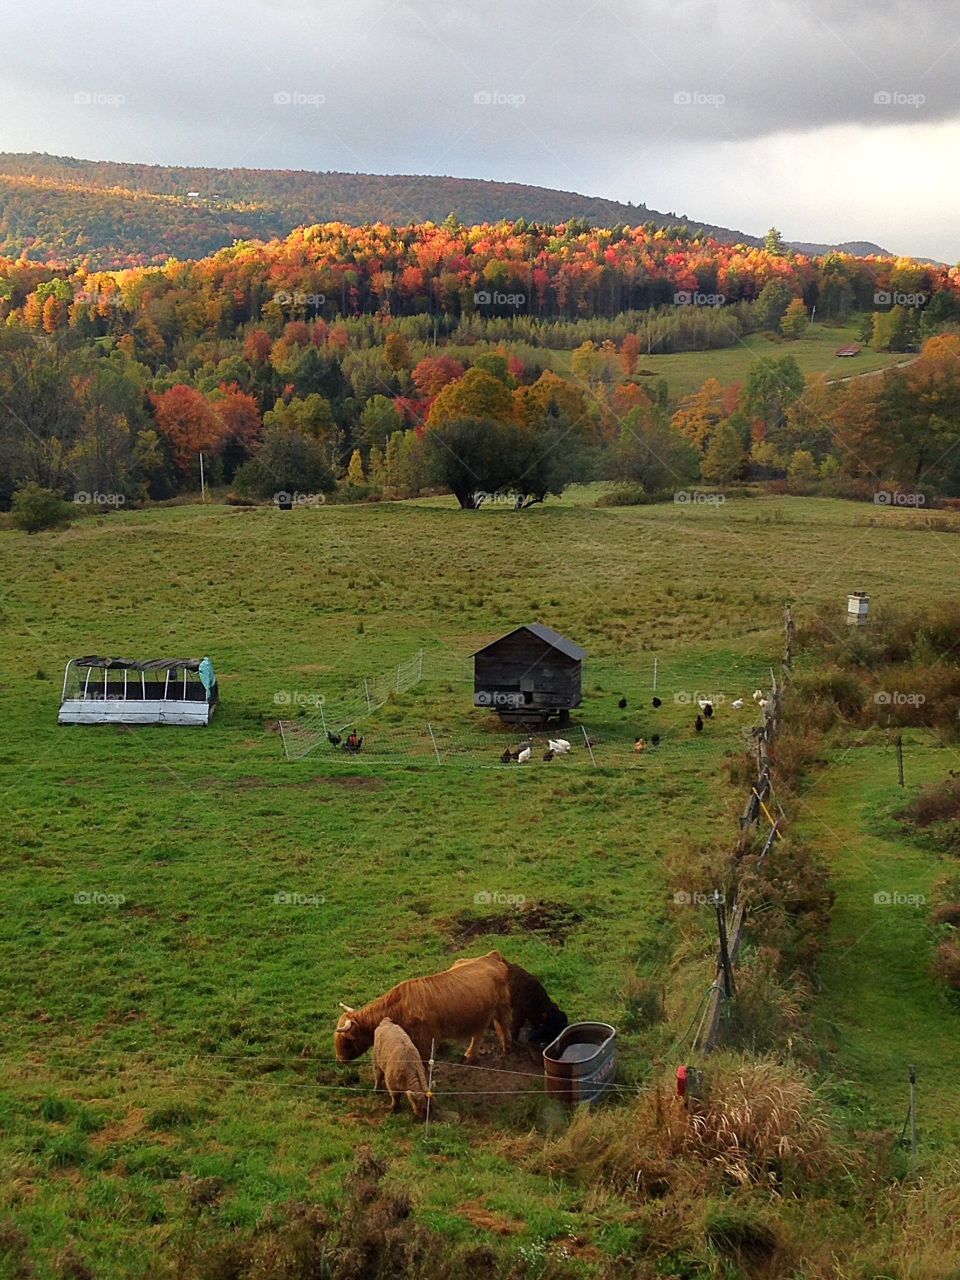 Perfection . You can't get better than autumn in Vermont on a farm in the mountains...
